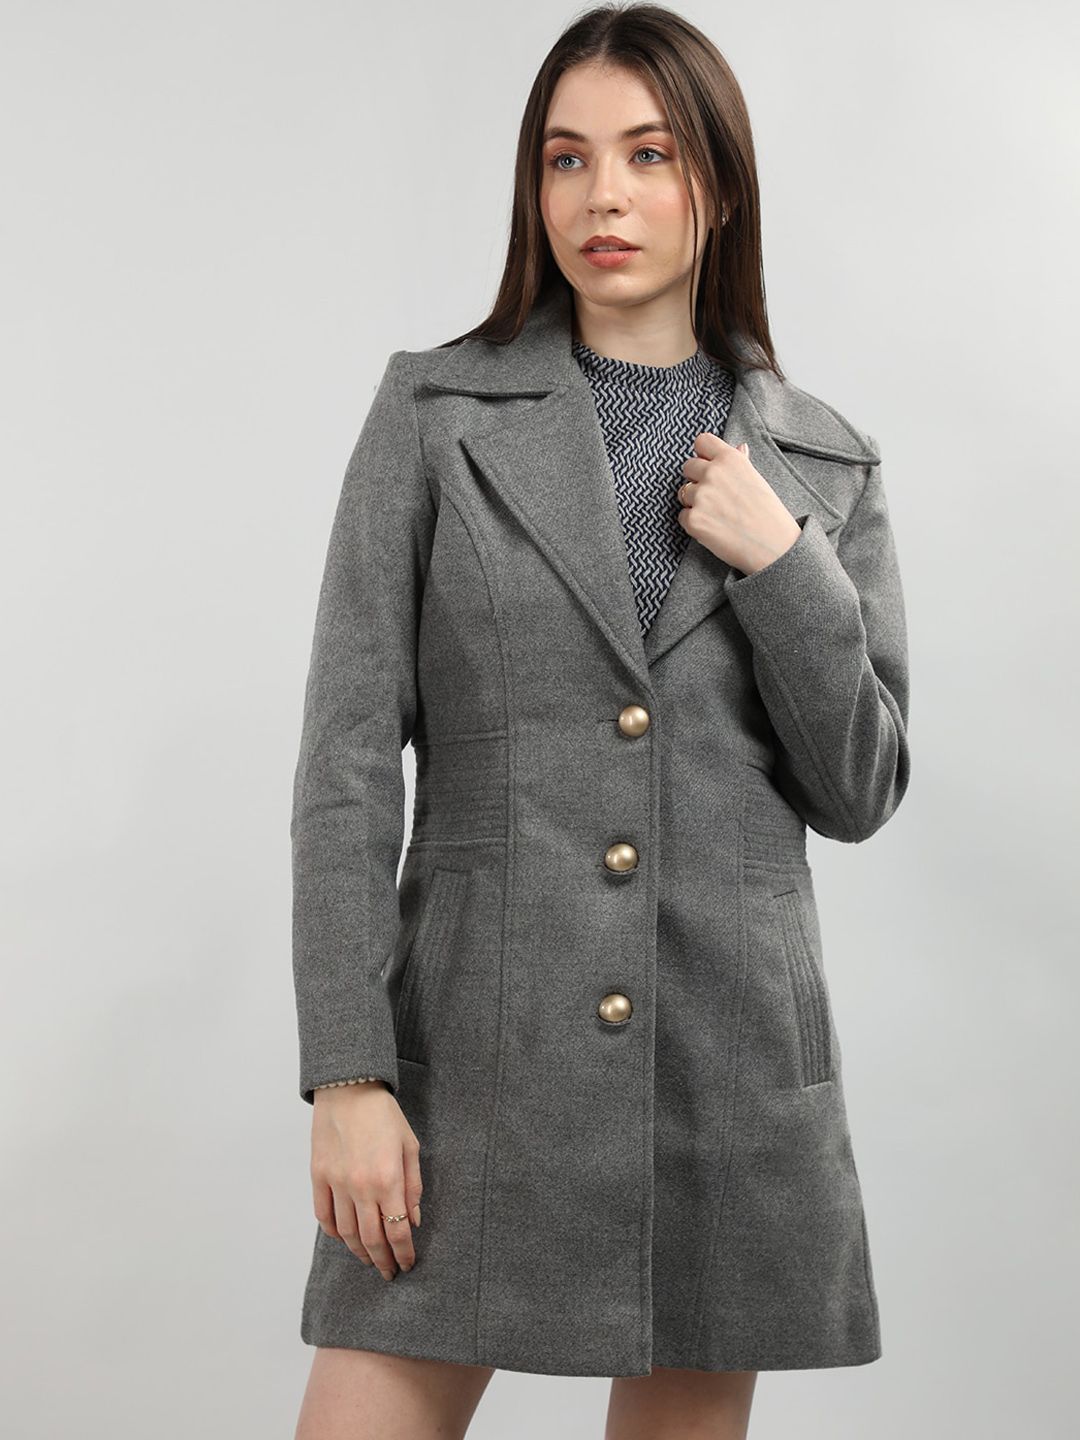 Solid High Neck Polyester Women's Coat